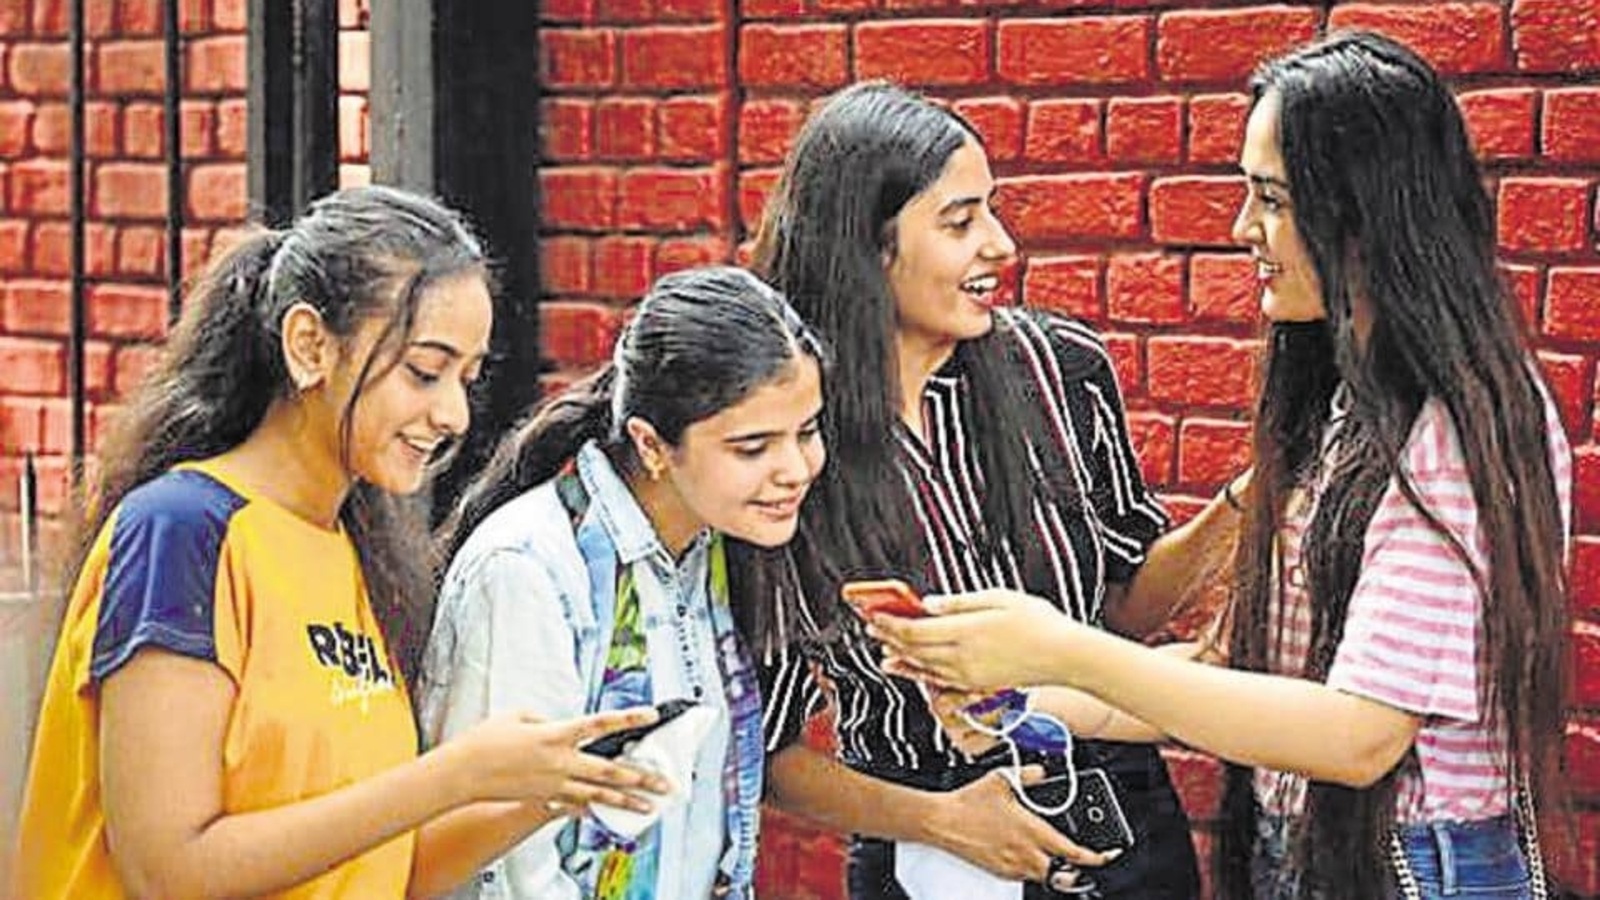 Meghalaya Board HSSLC Result 2022: How to check MBOSE 12th result on mobile